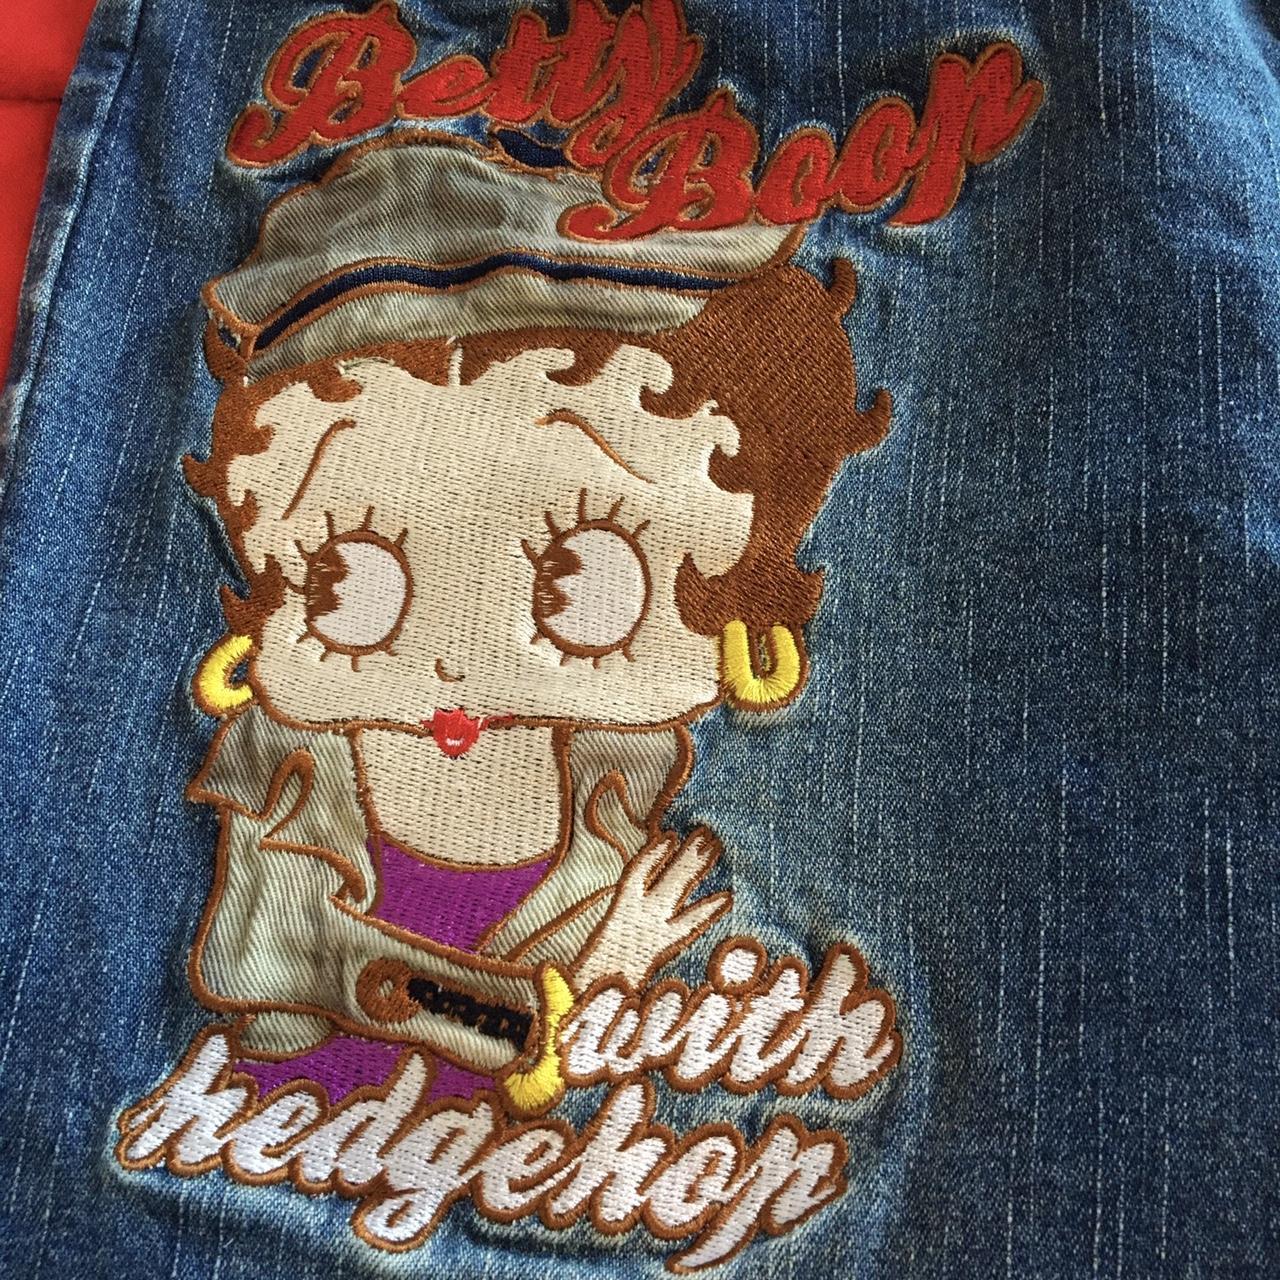 Betty boop embroidered jeans, Rare! Betty boop with